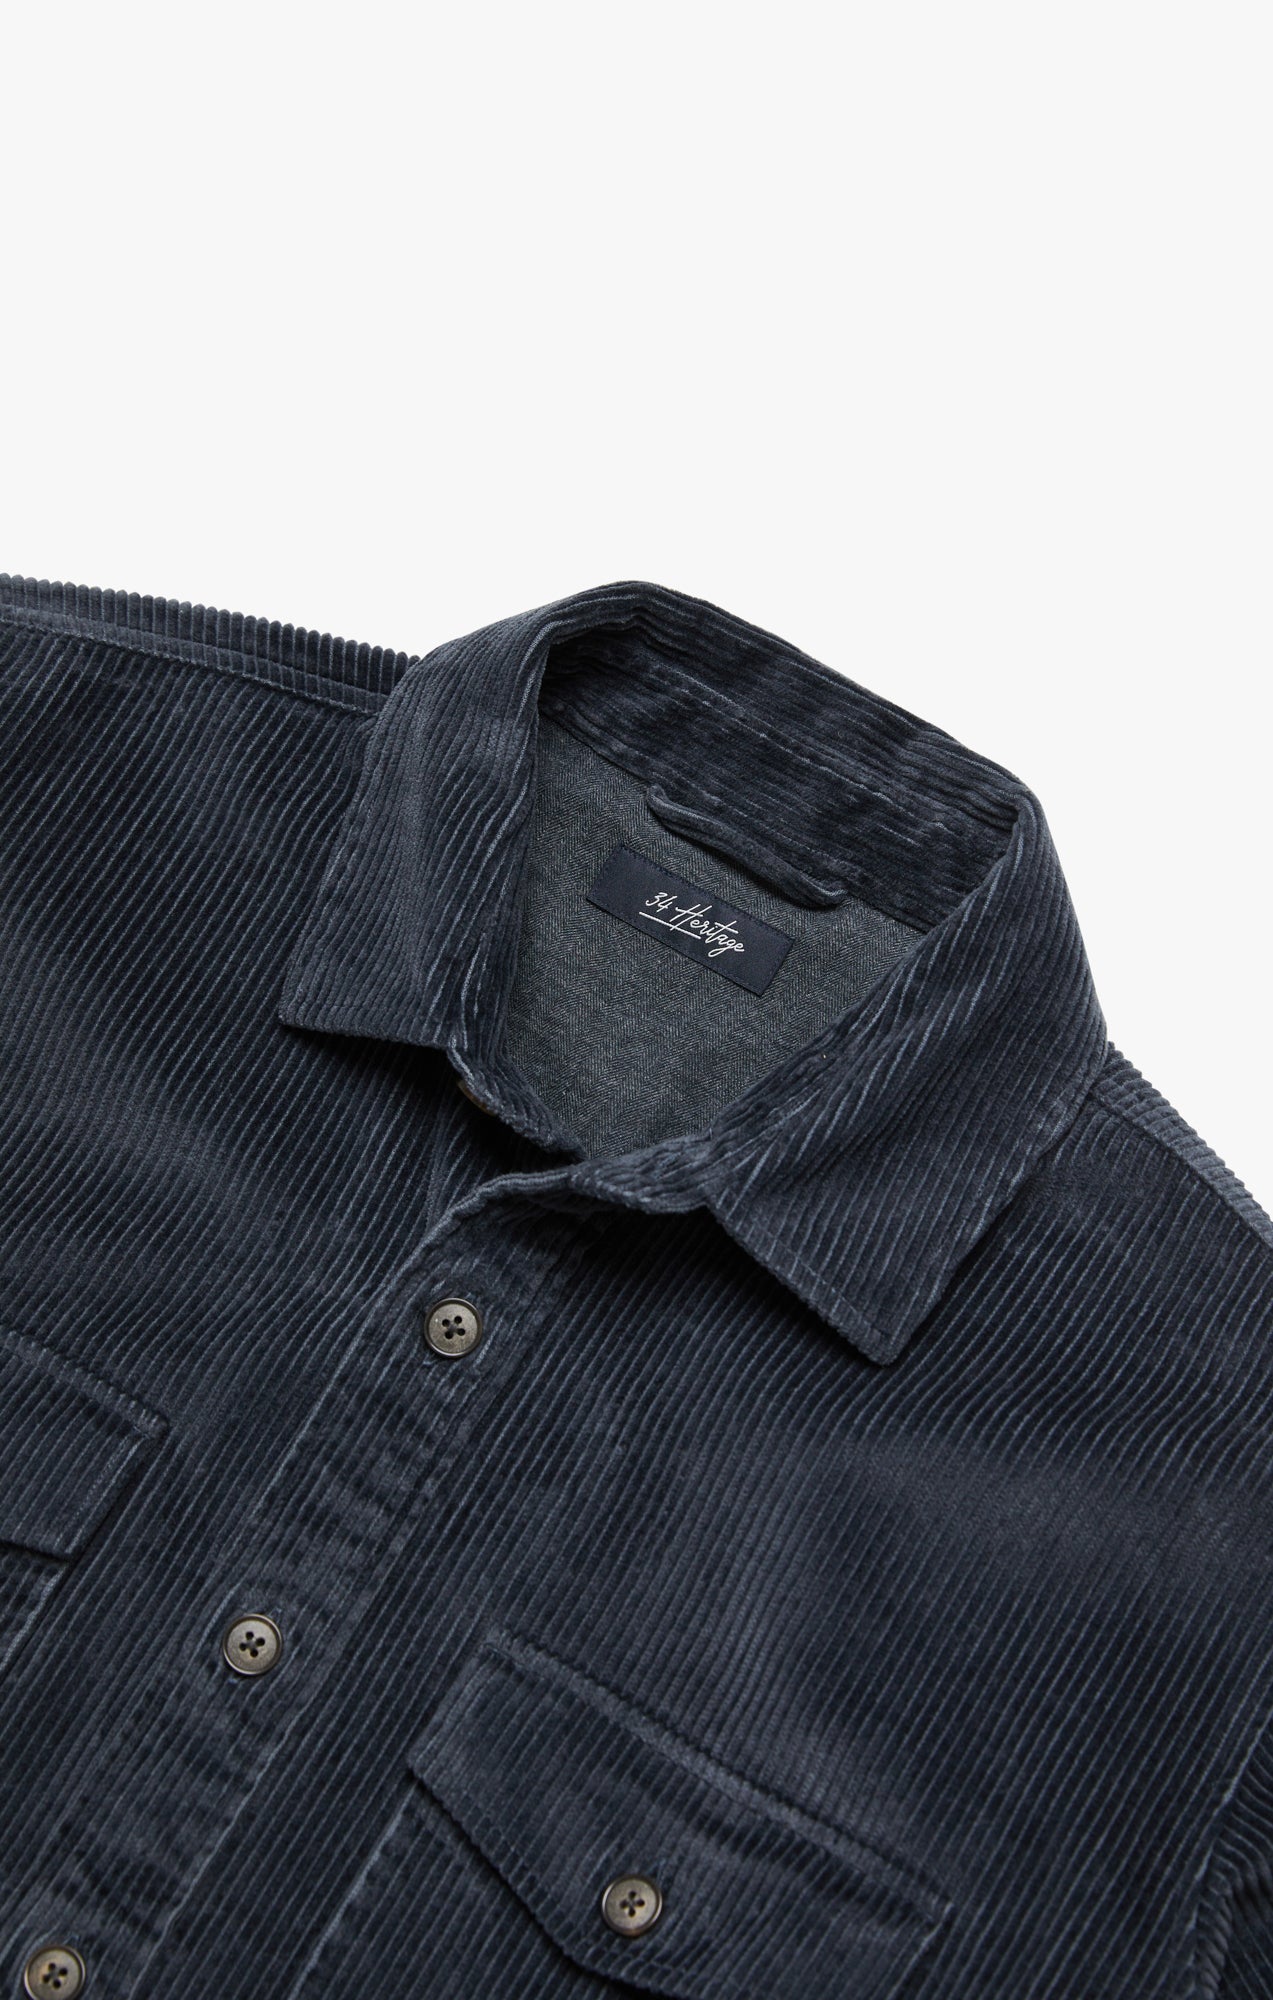 Overshirt In Charcoal Image 11